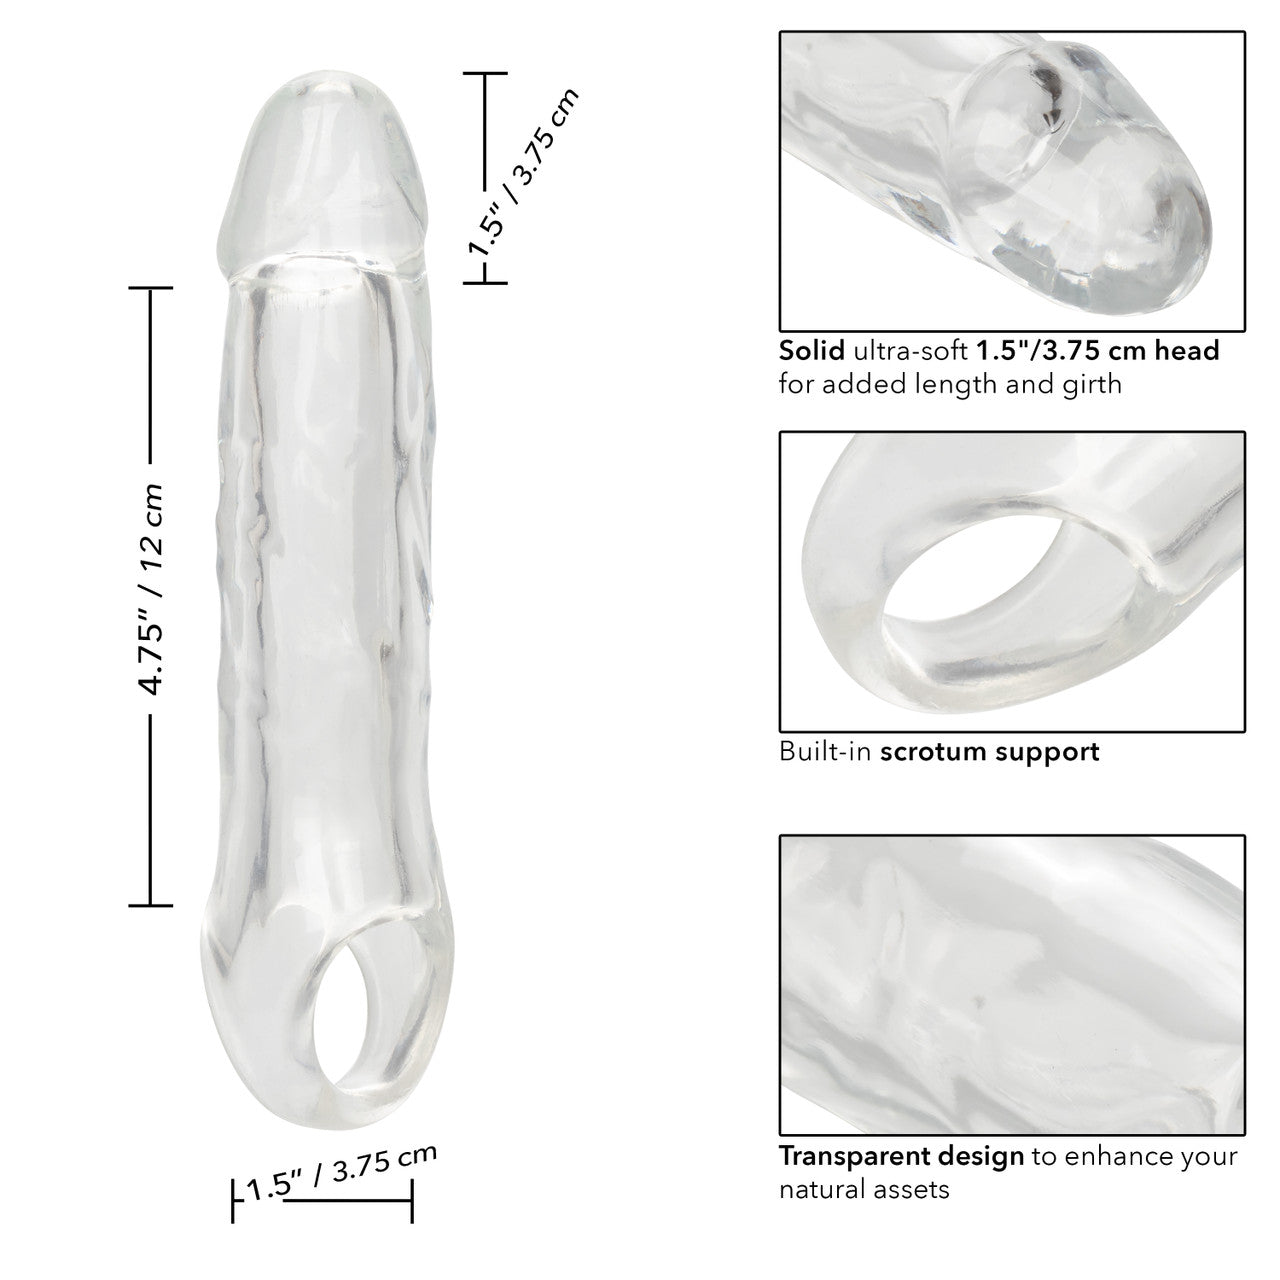 Performance Maxx™ Clear Extension 6.5"